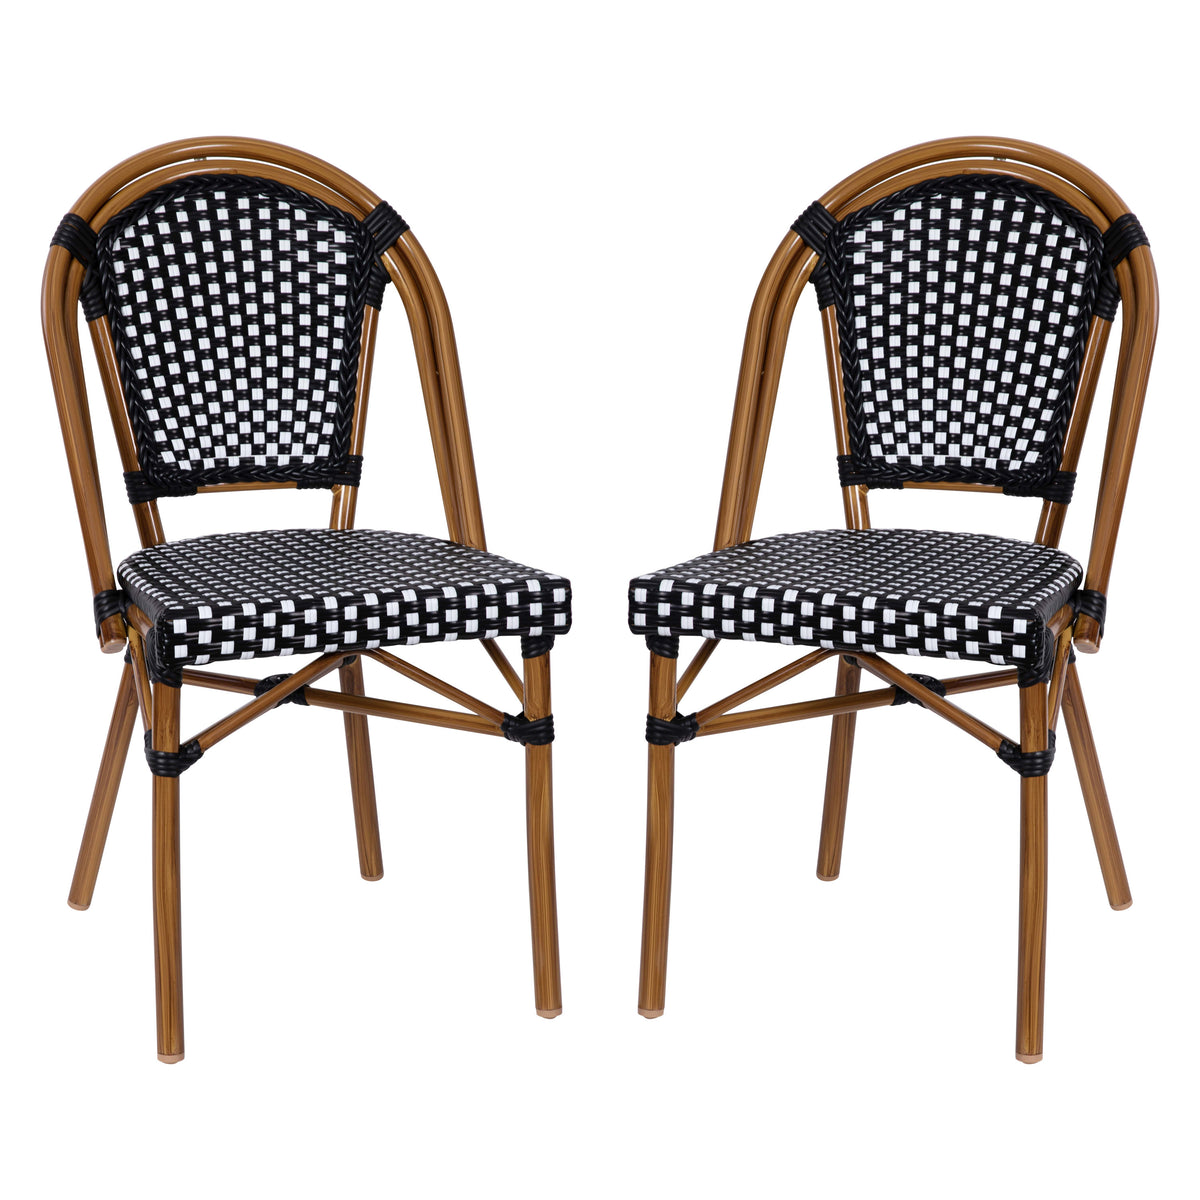 Black & White/Natural Frame |#| 2 Pack All-Weather Commercial Paris Chairs with Bamboo Print Frame-Black/White